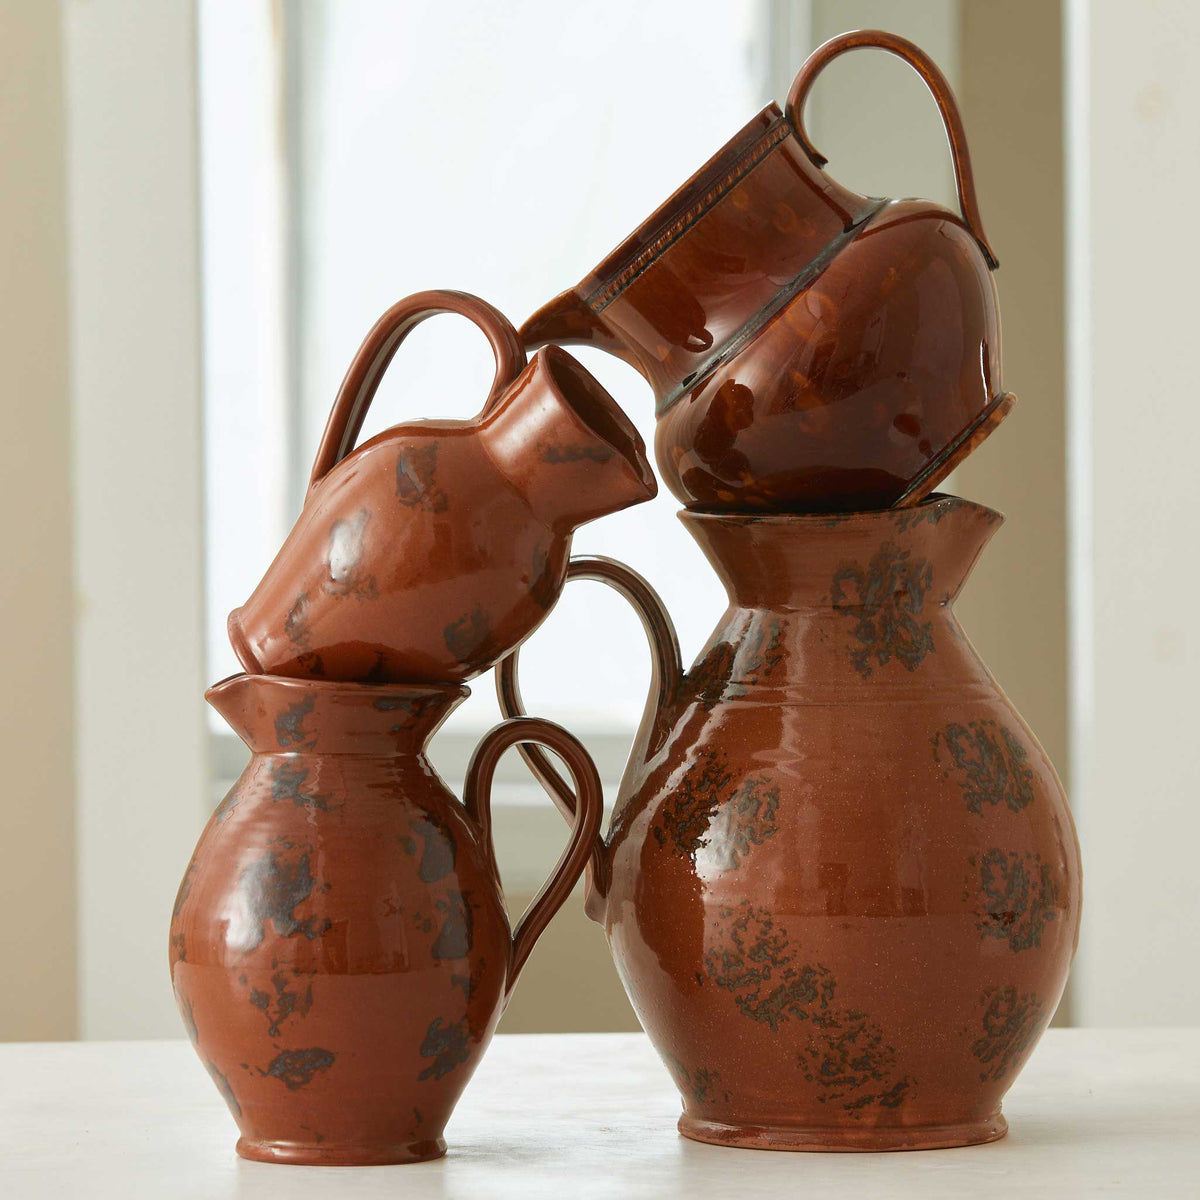 LIMITED EDITION REDWARE PITCHERS